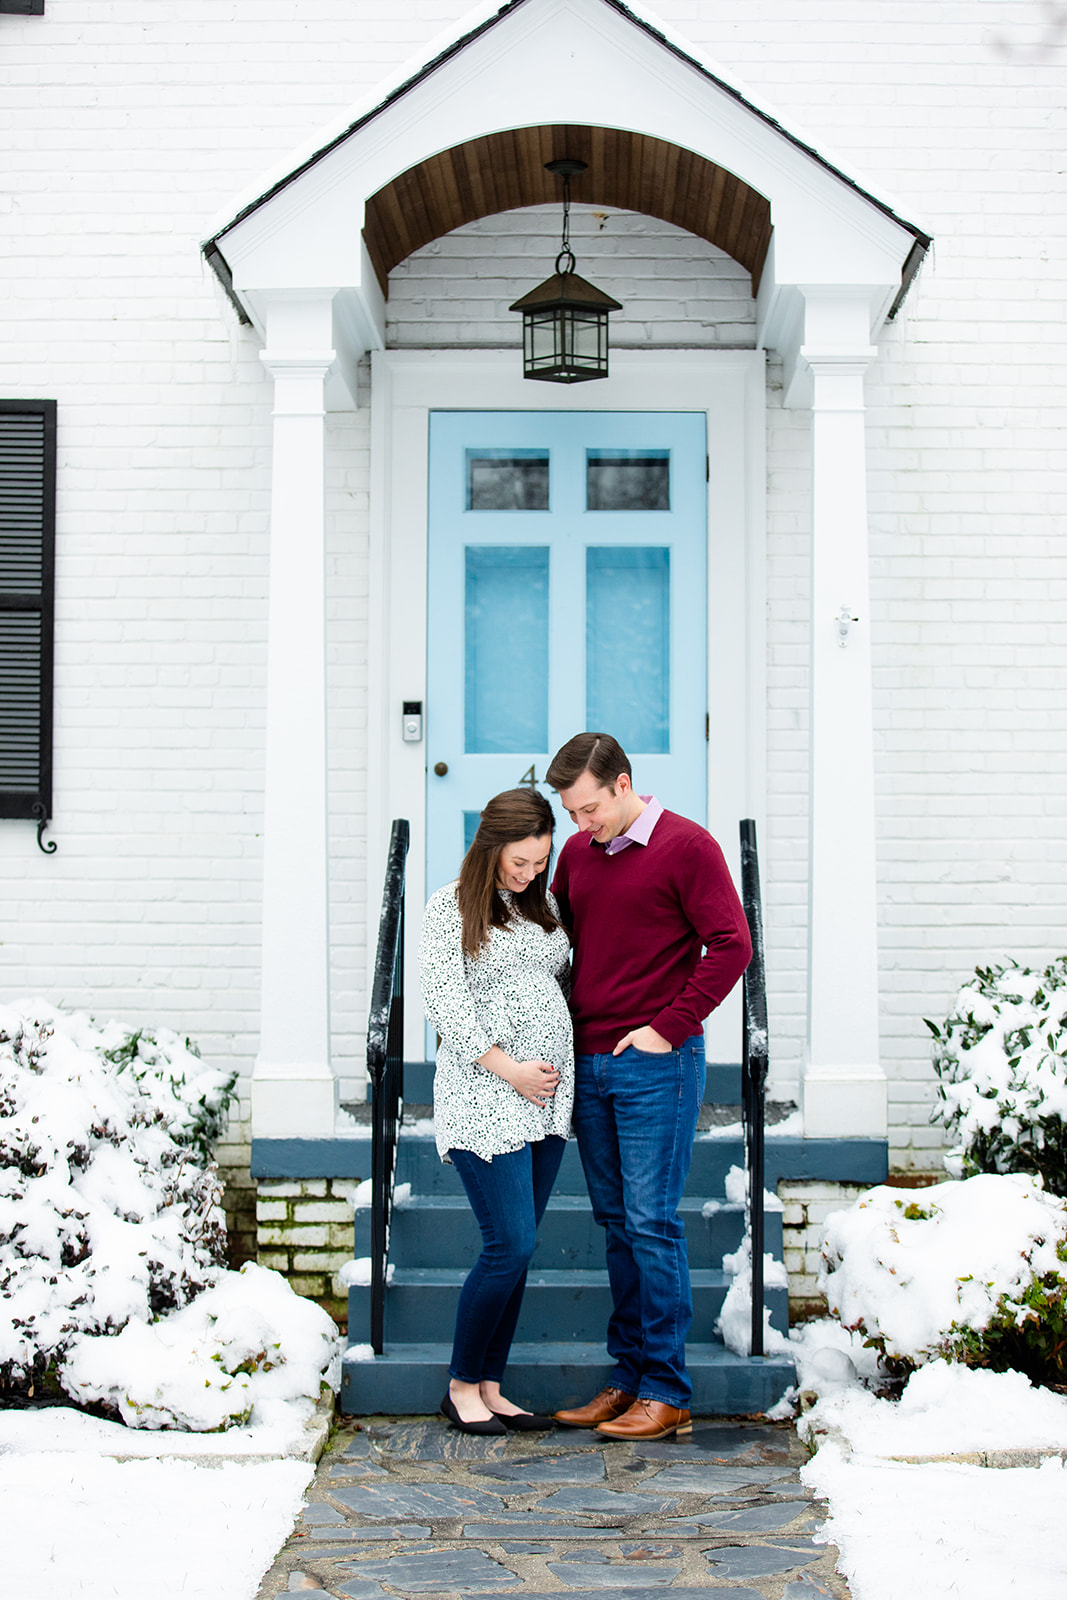 Snowy Valentines Day Front Porch Sessions - Image Property of www.j-dphoto.com